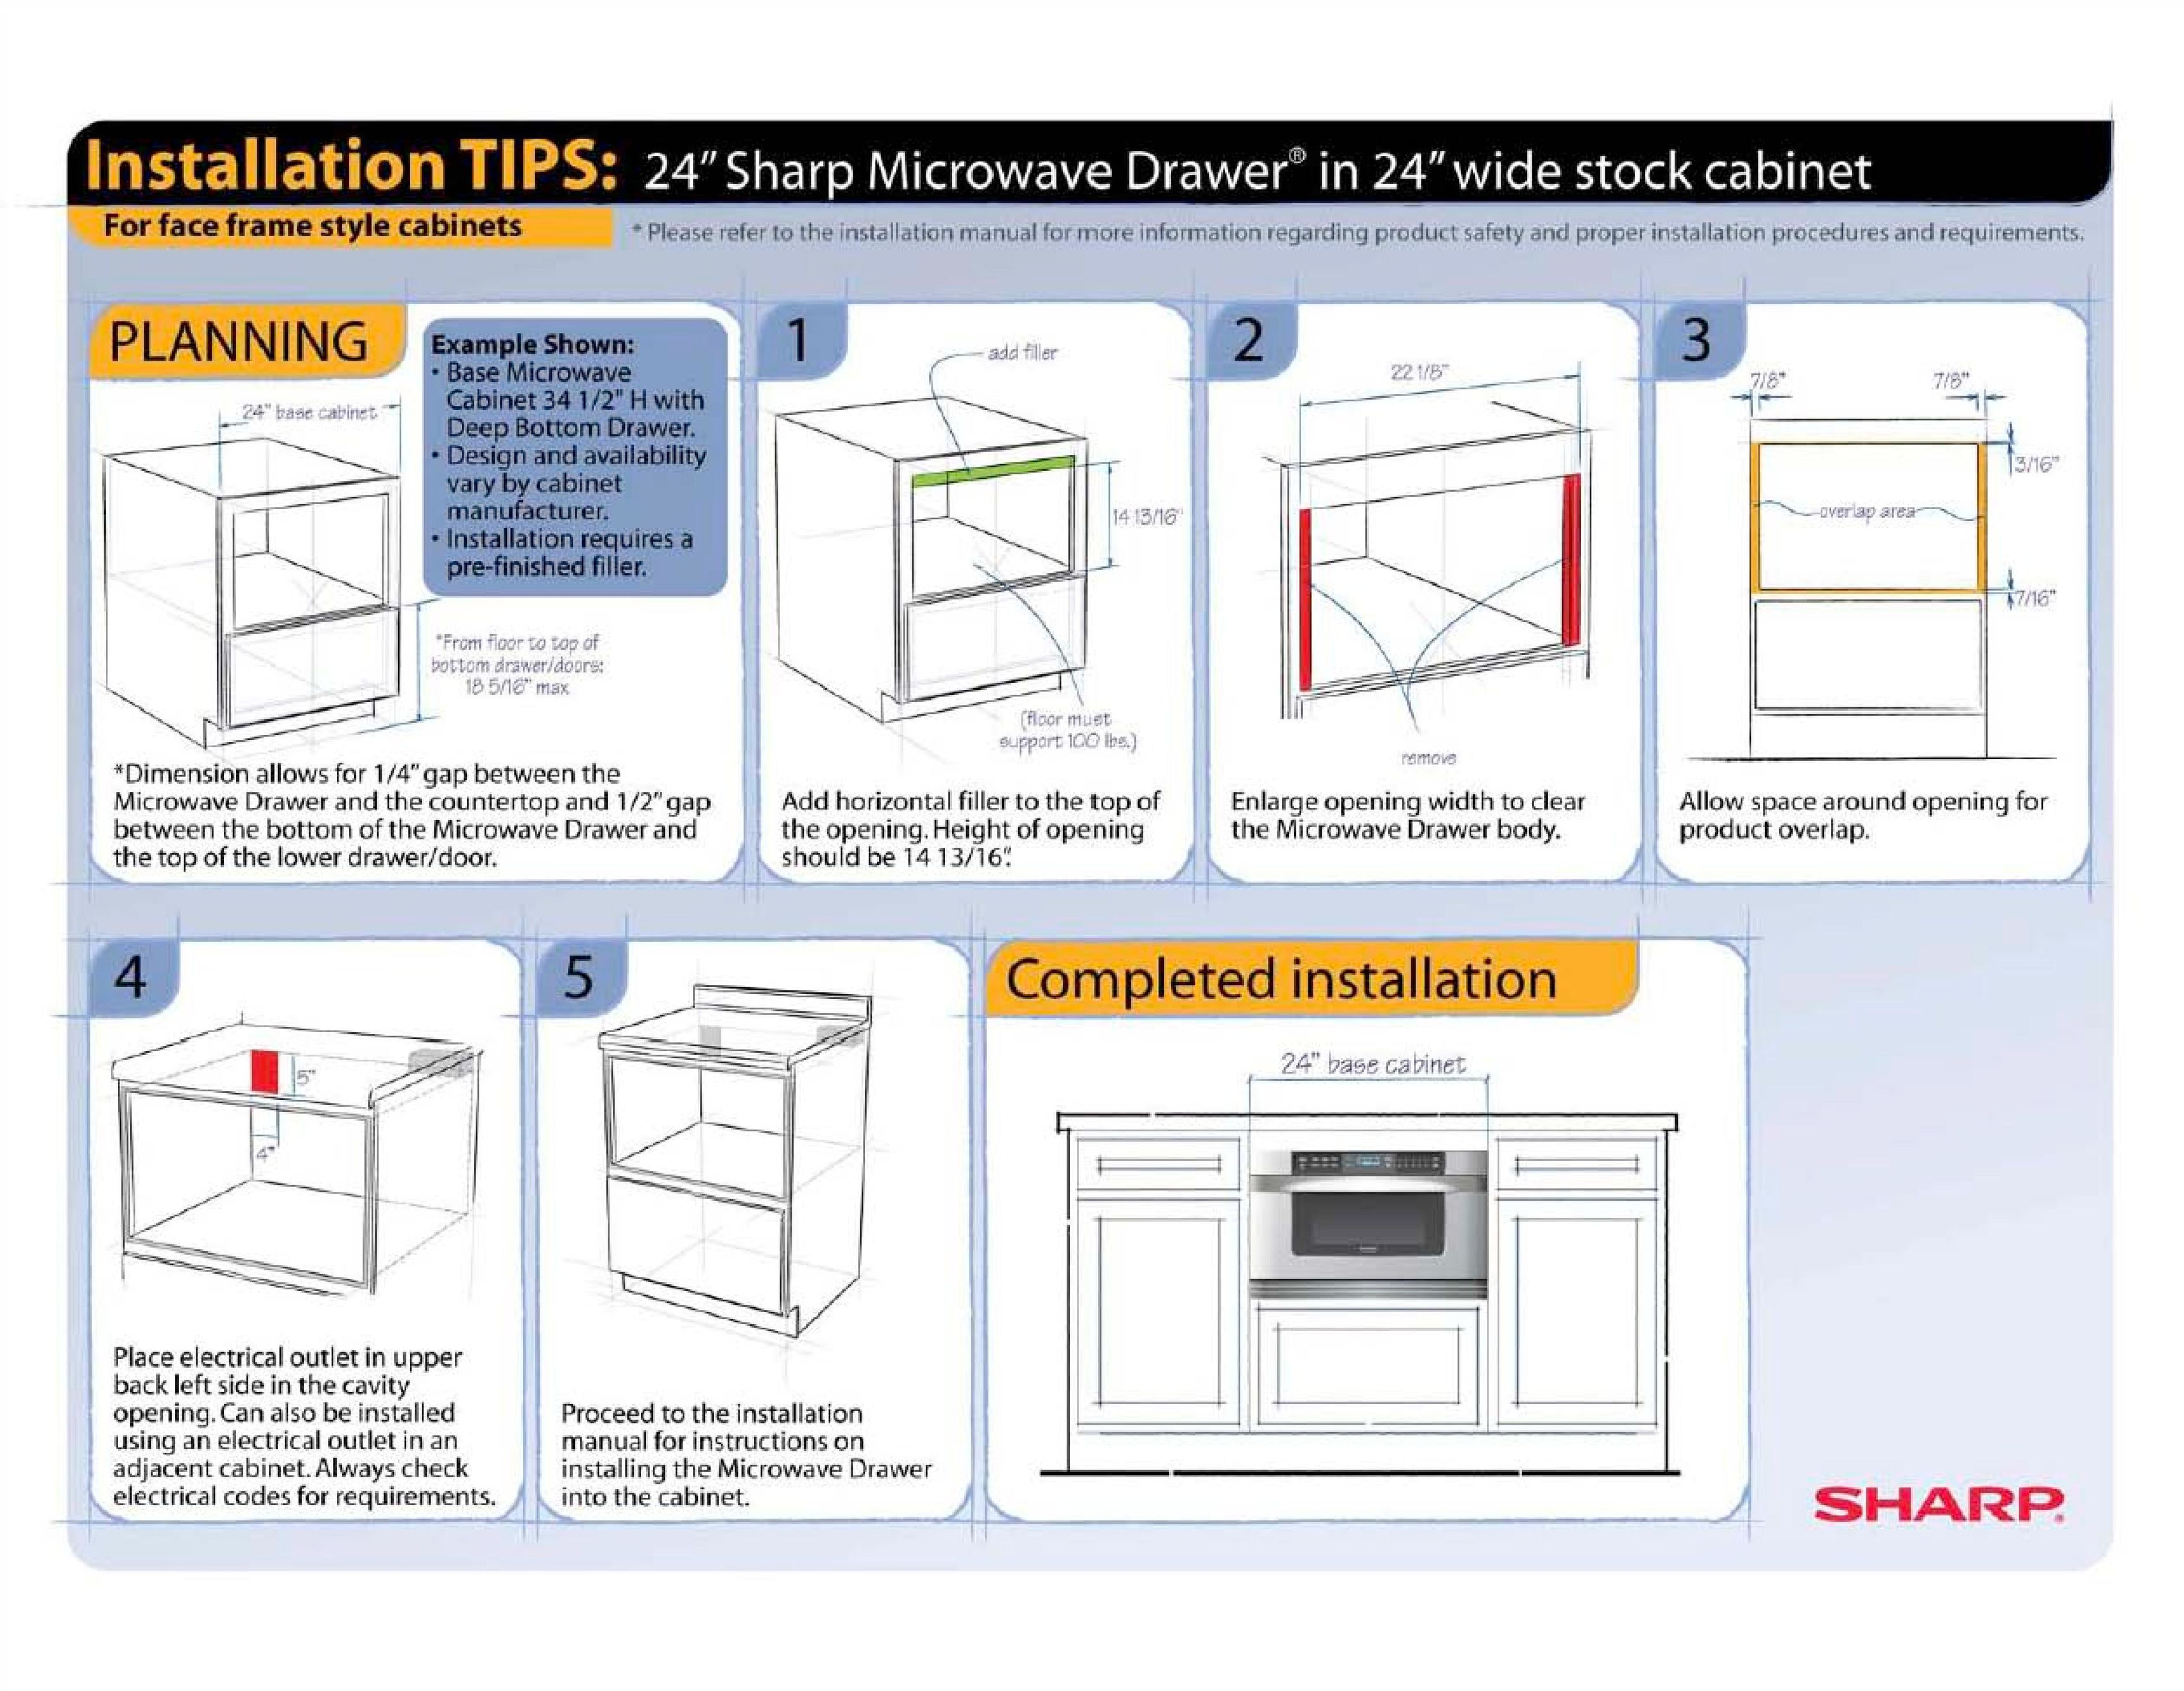 Sharp KB6524PW Microwave Oven User Manual